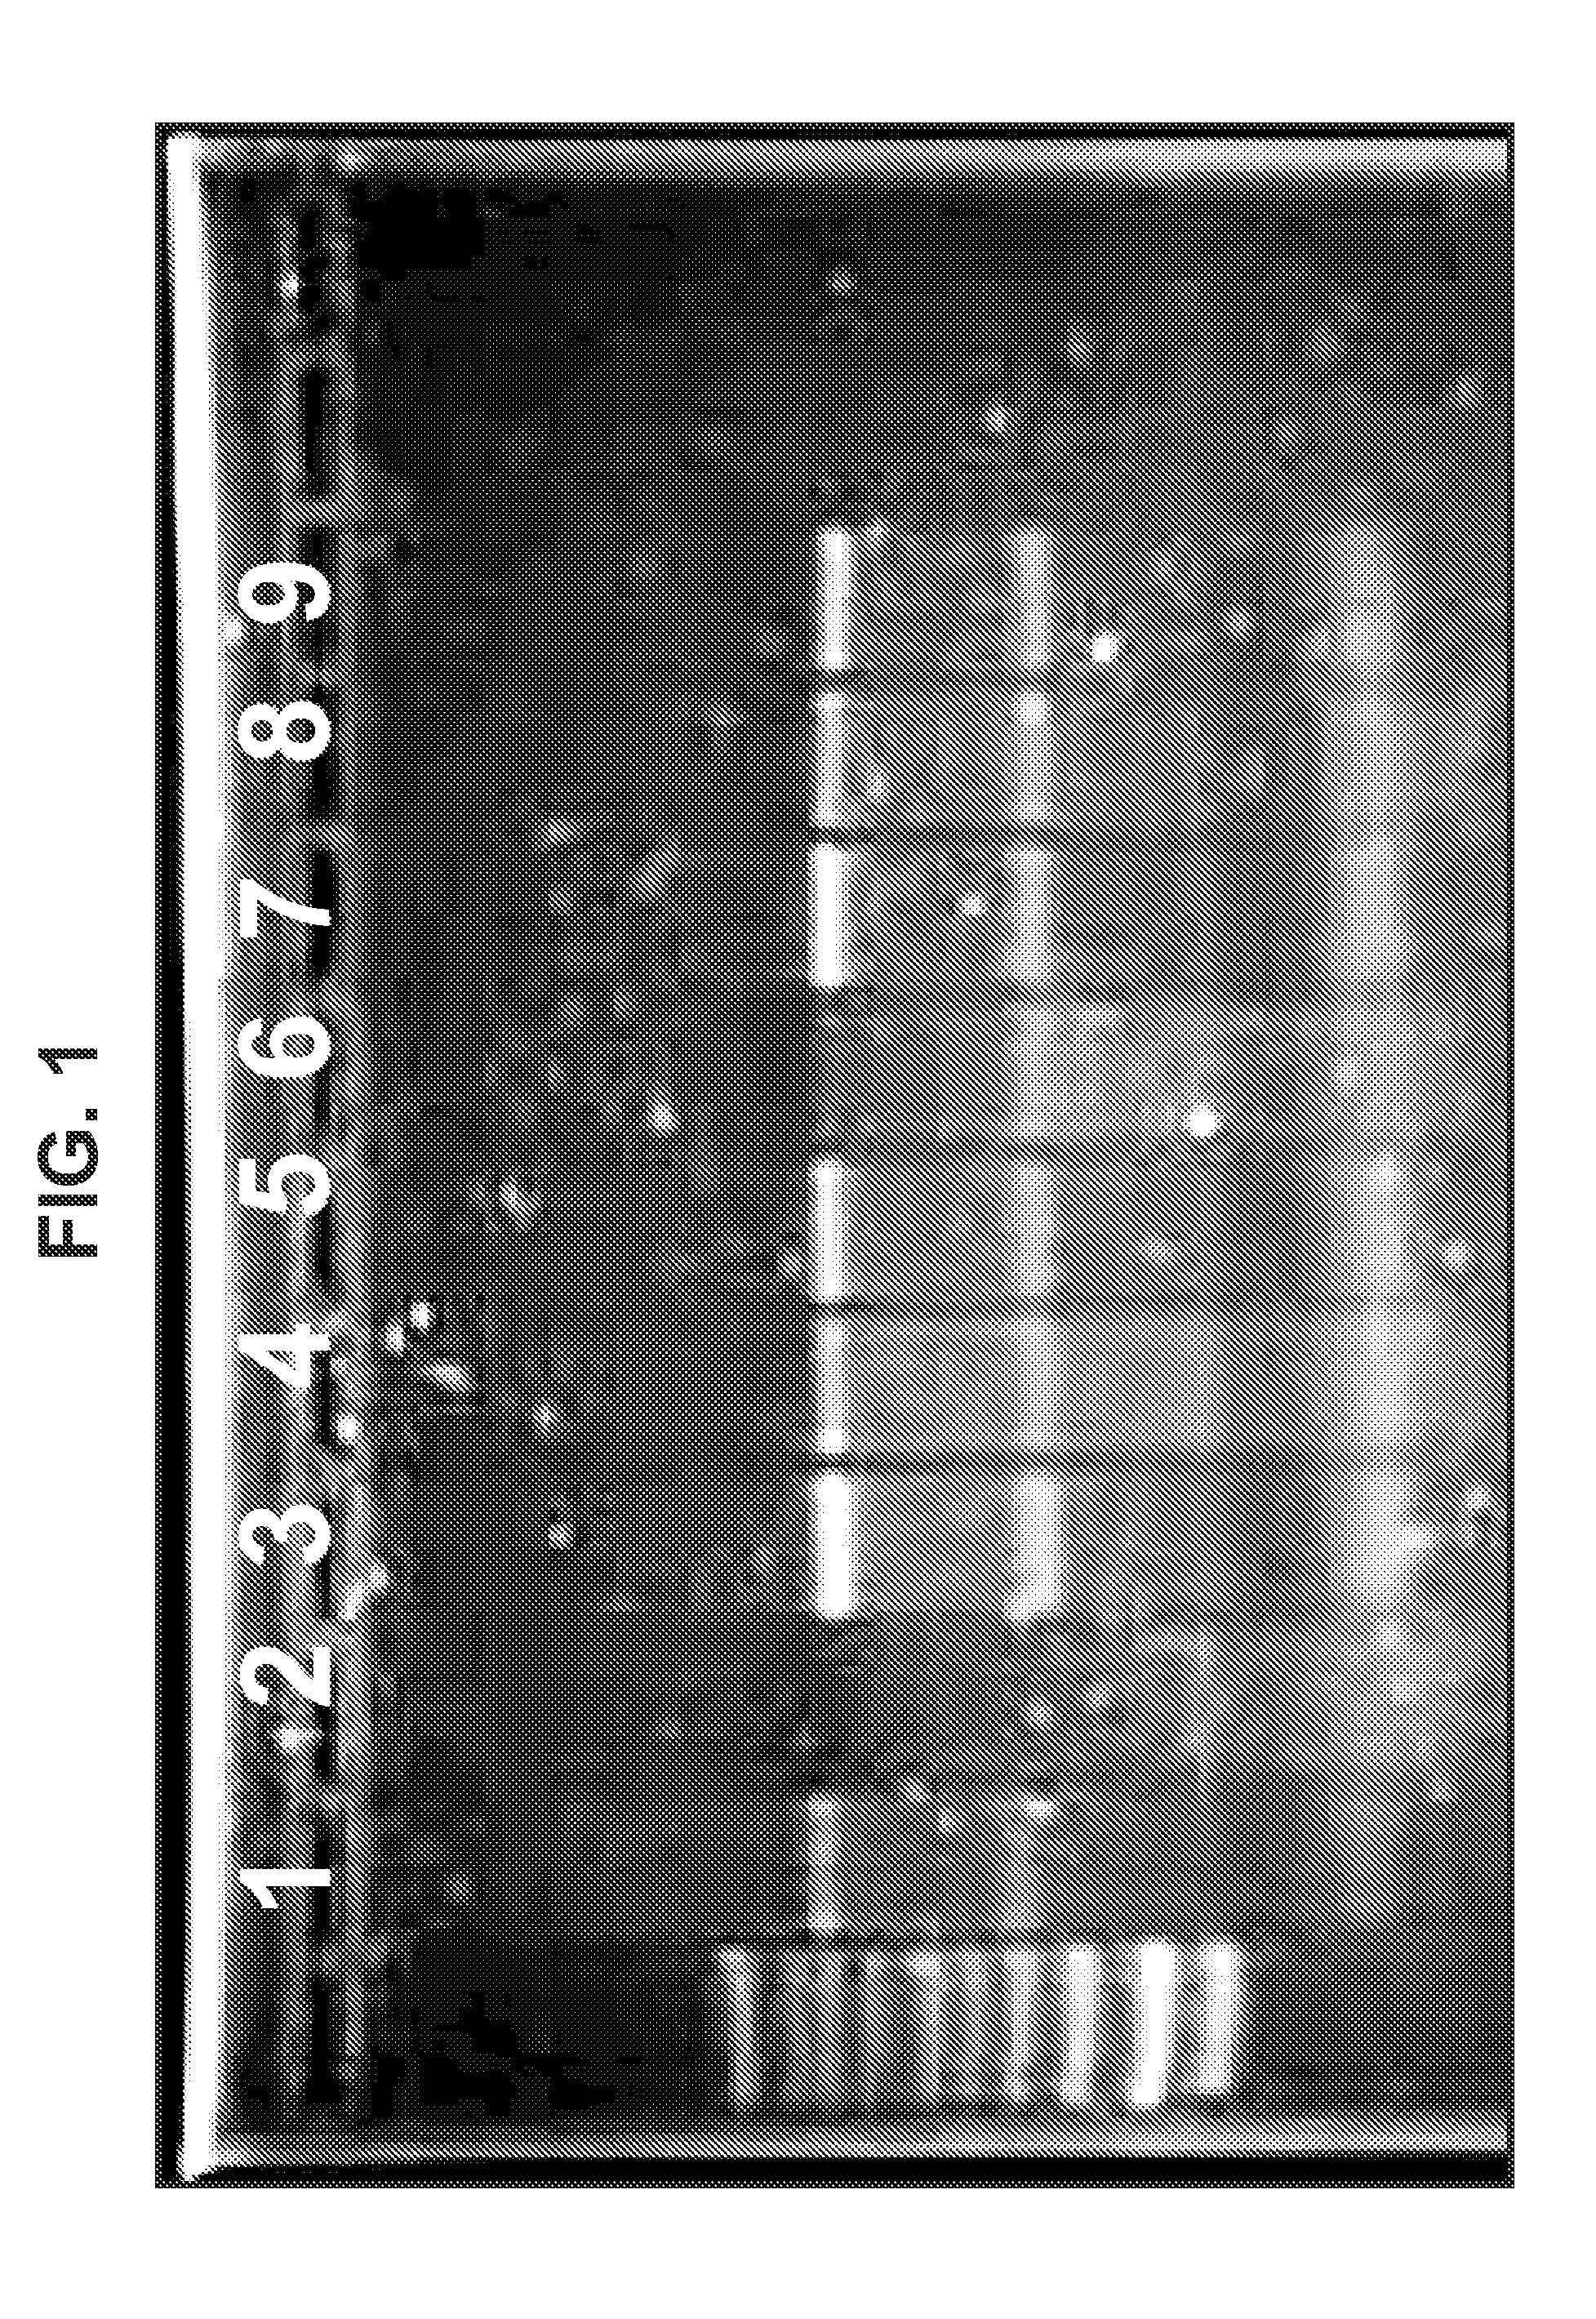 Cationic oil-in-water emulsions